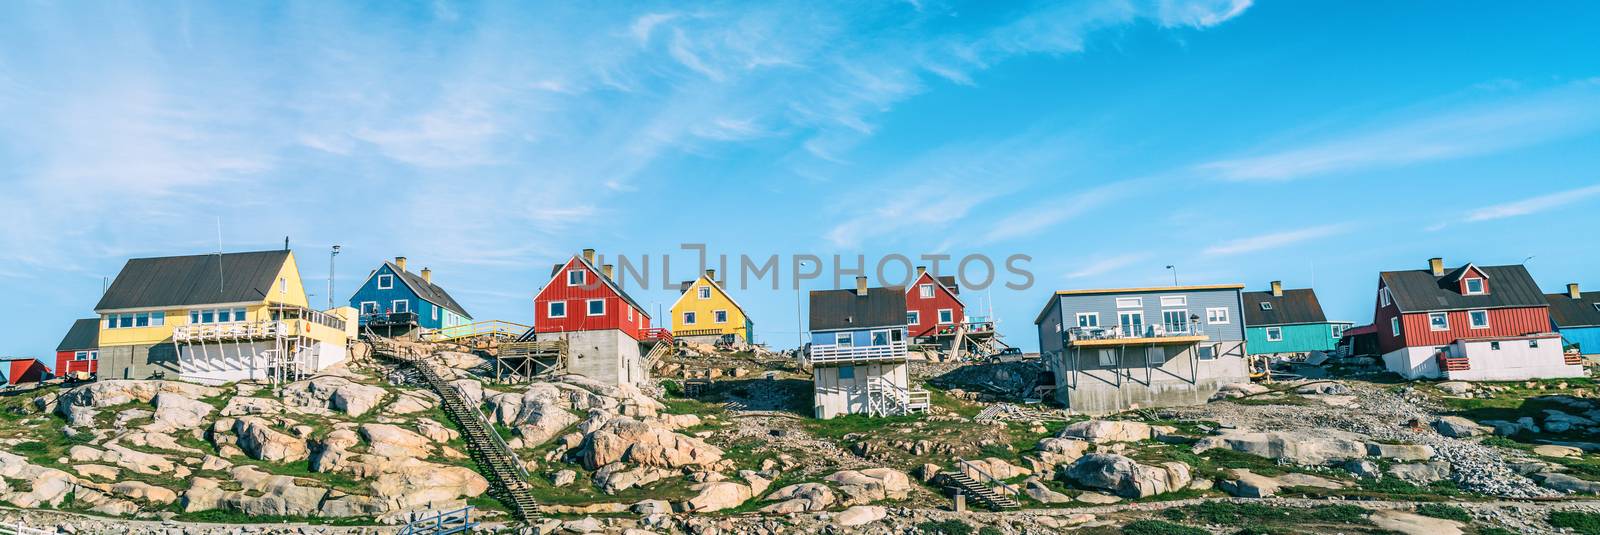 Greenland view of houses in Ilulissat City and icefjord. Tourist destination in the actic. Panoramic photo of typical Greenland village houses.